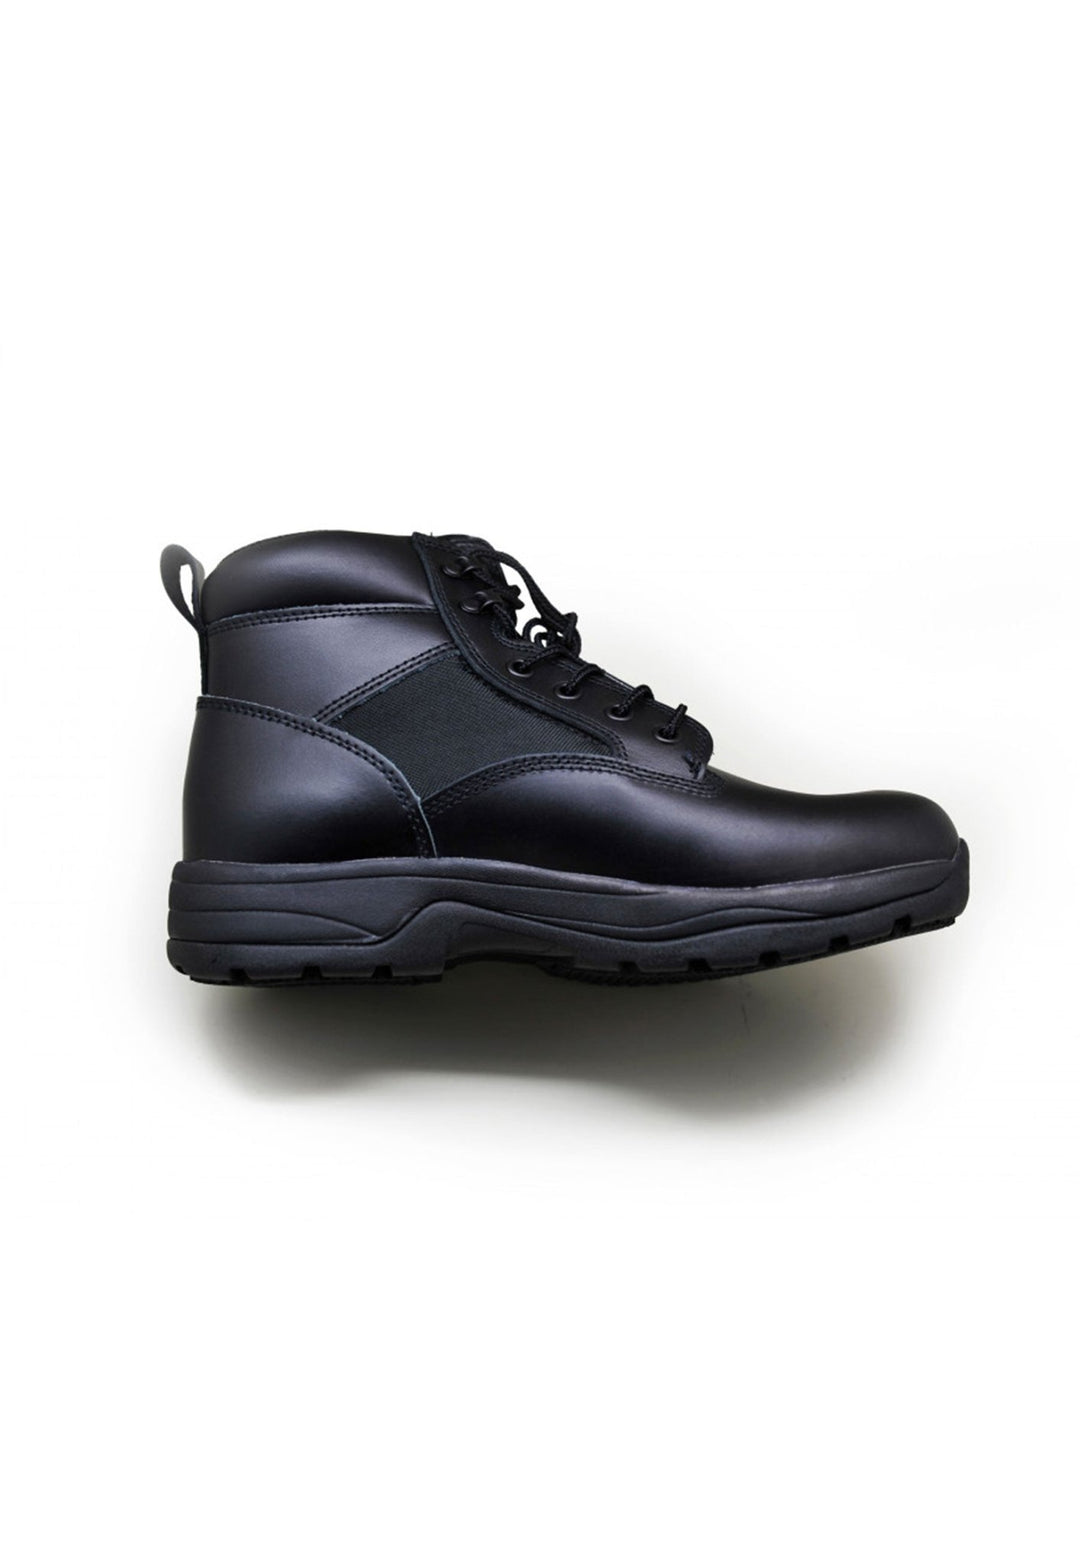 OPGear Security Boots - The Work Uniform Company